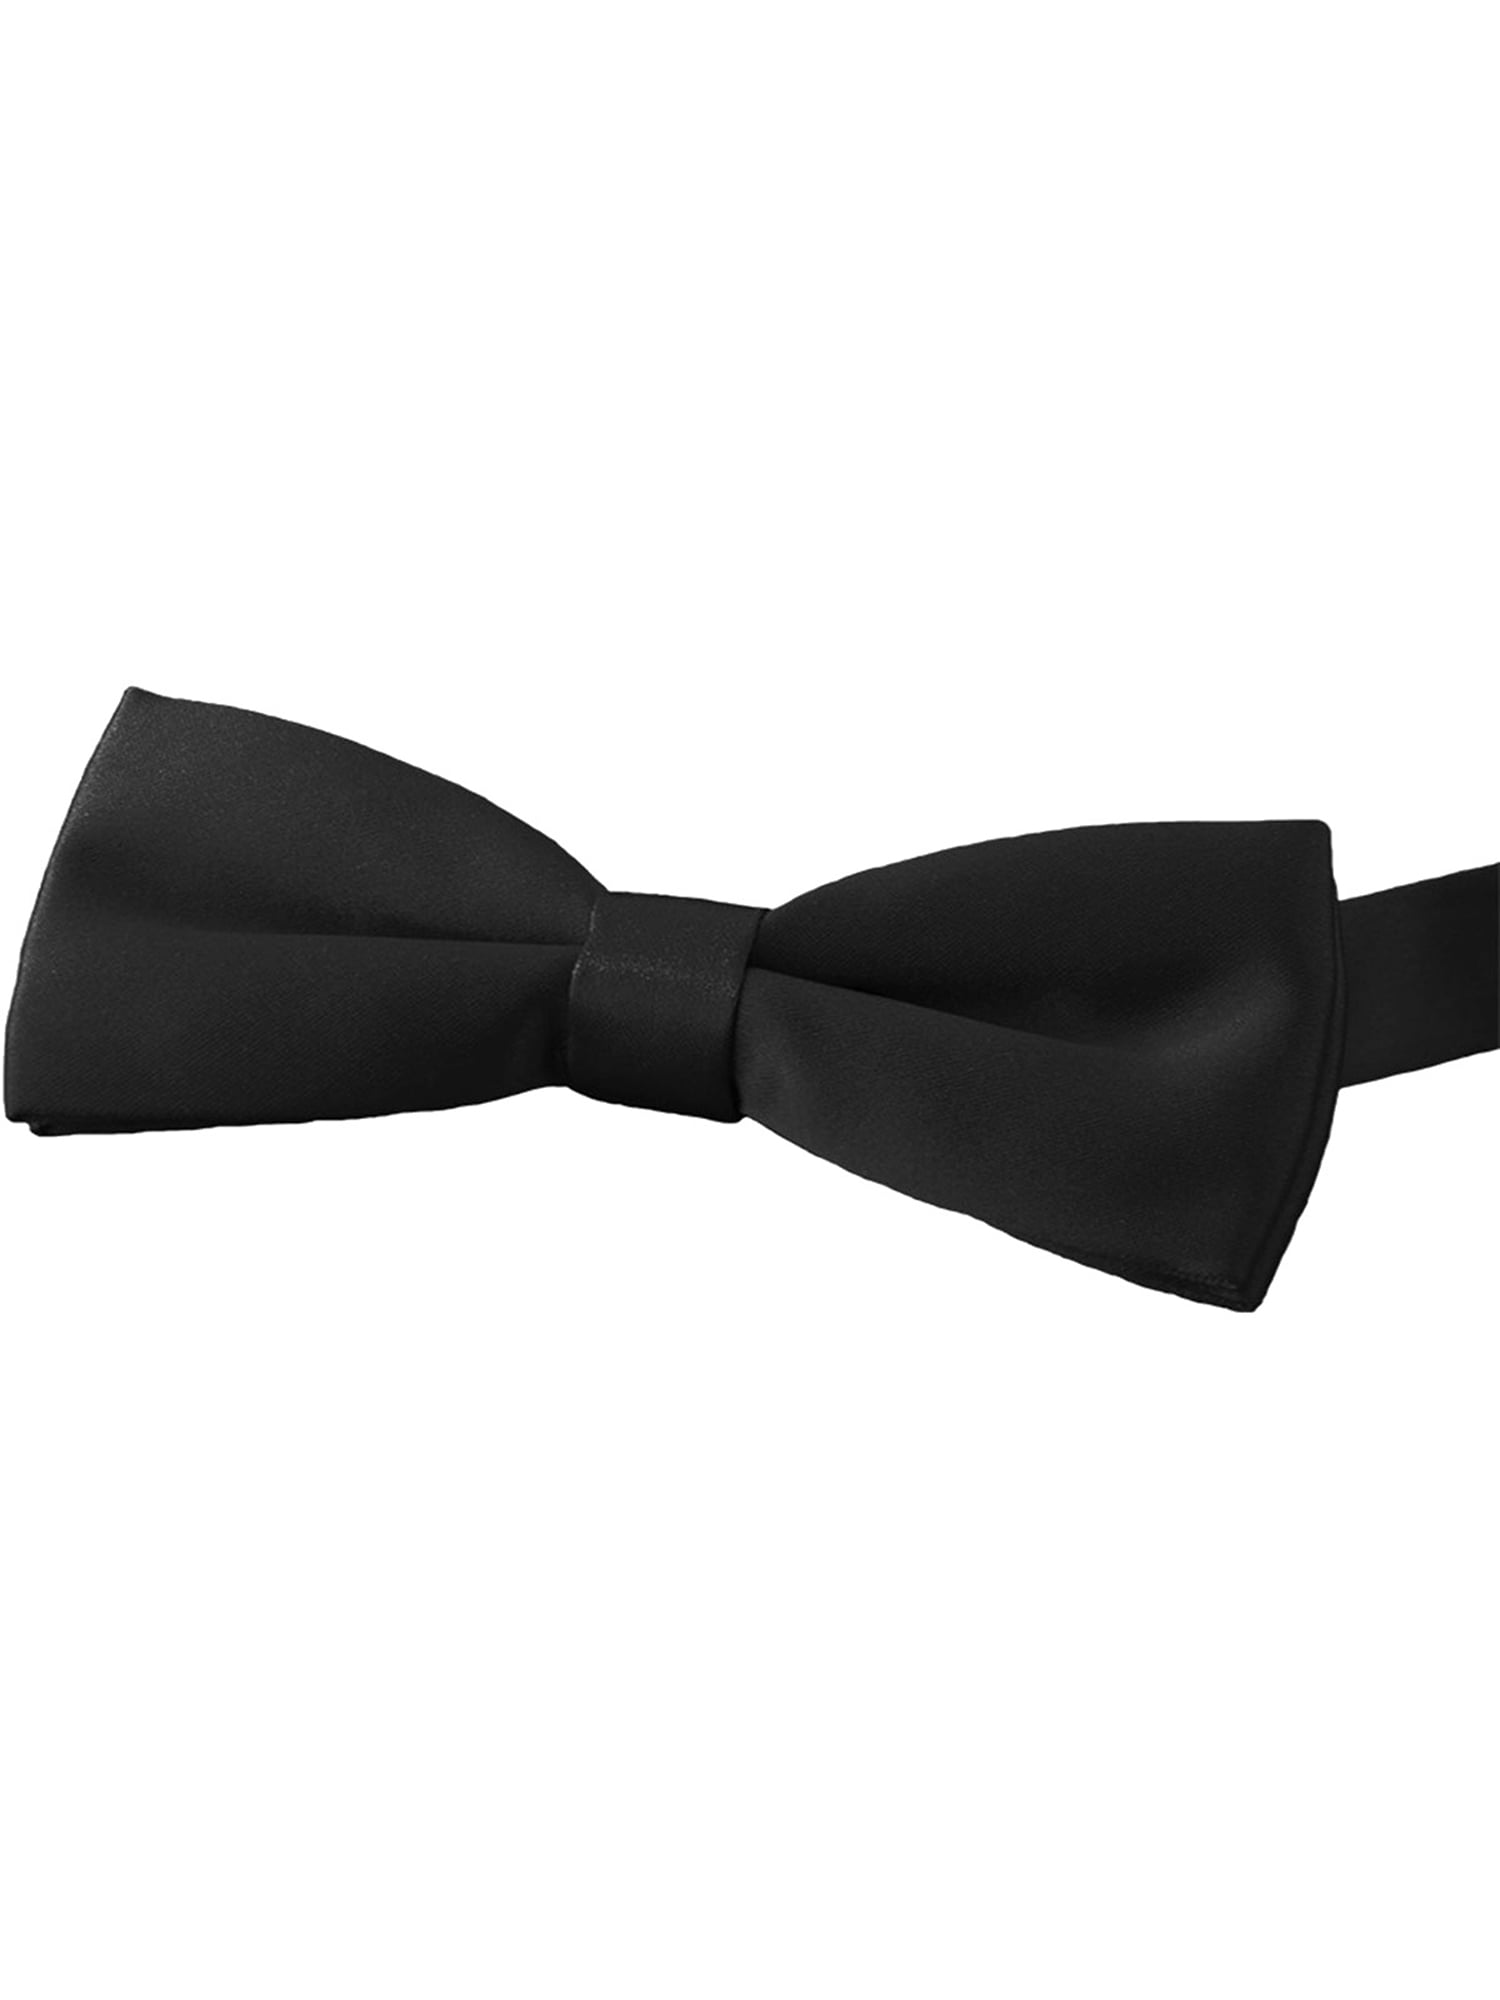 Brybelly Formal Black Casino and Poker Dealer Clip On Bow Tie 